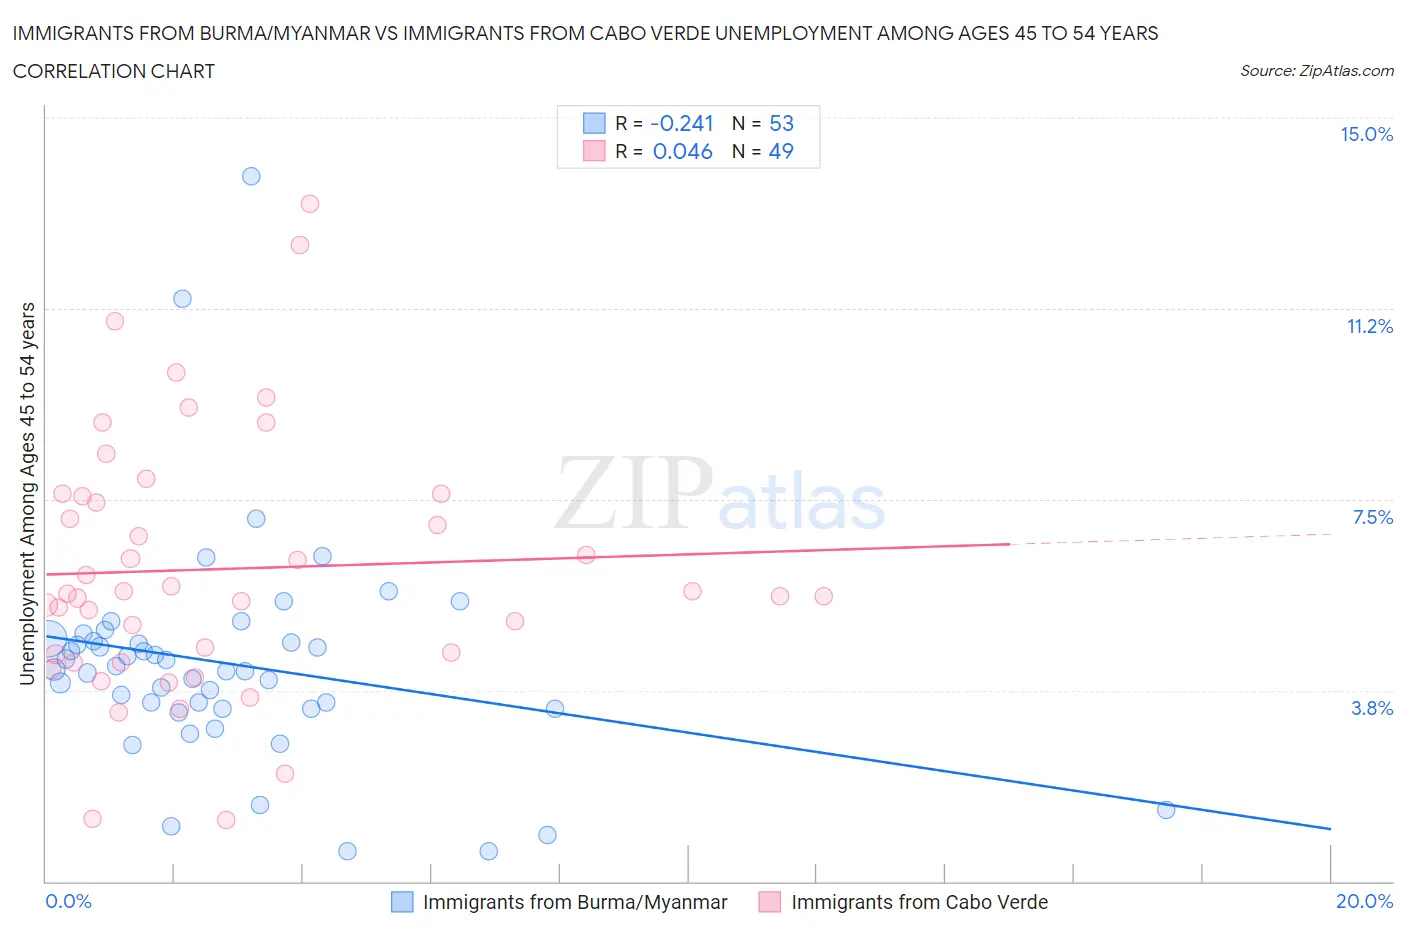 Immigrants from Burma/Myanmar vs Immigrants from Cabo Verde Unemployment Among Ages 45 to 54 years